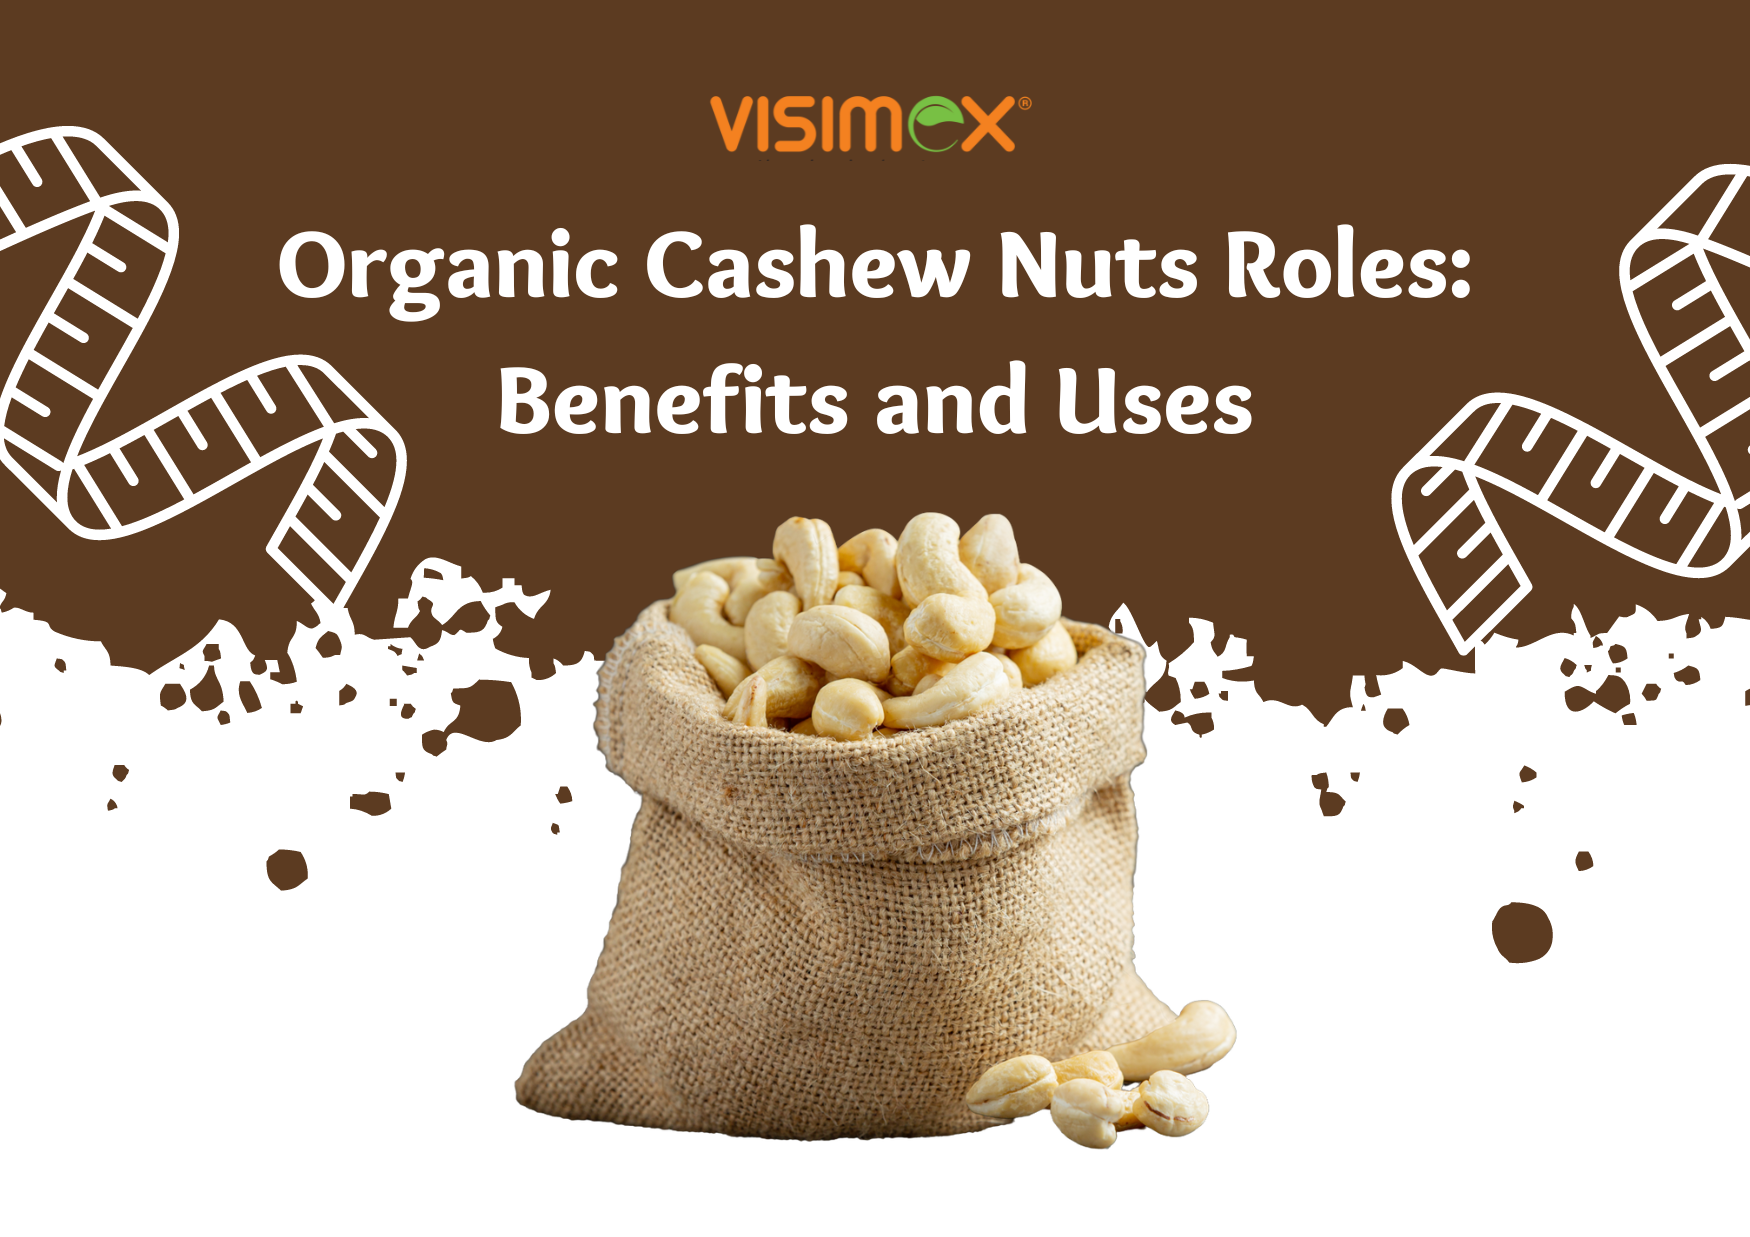 Organic Cashew Nuts Roles: Benefits and Uses